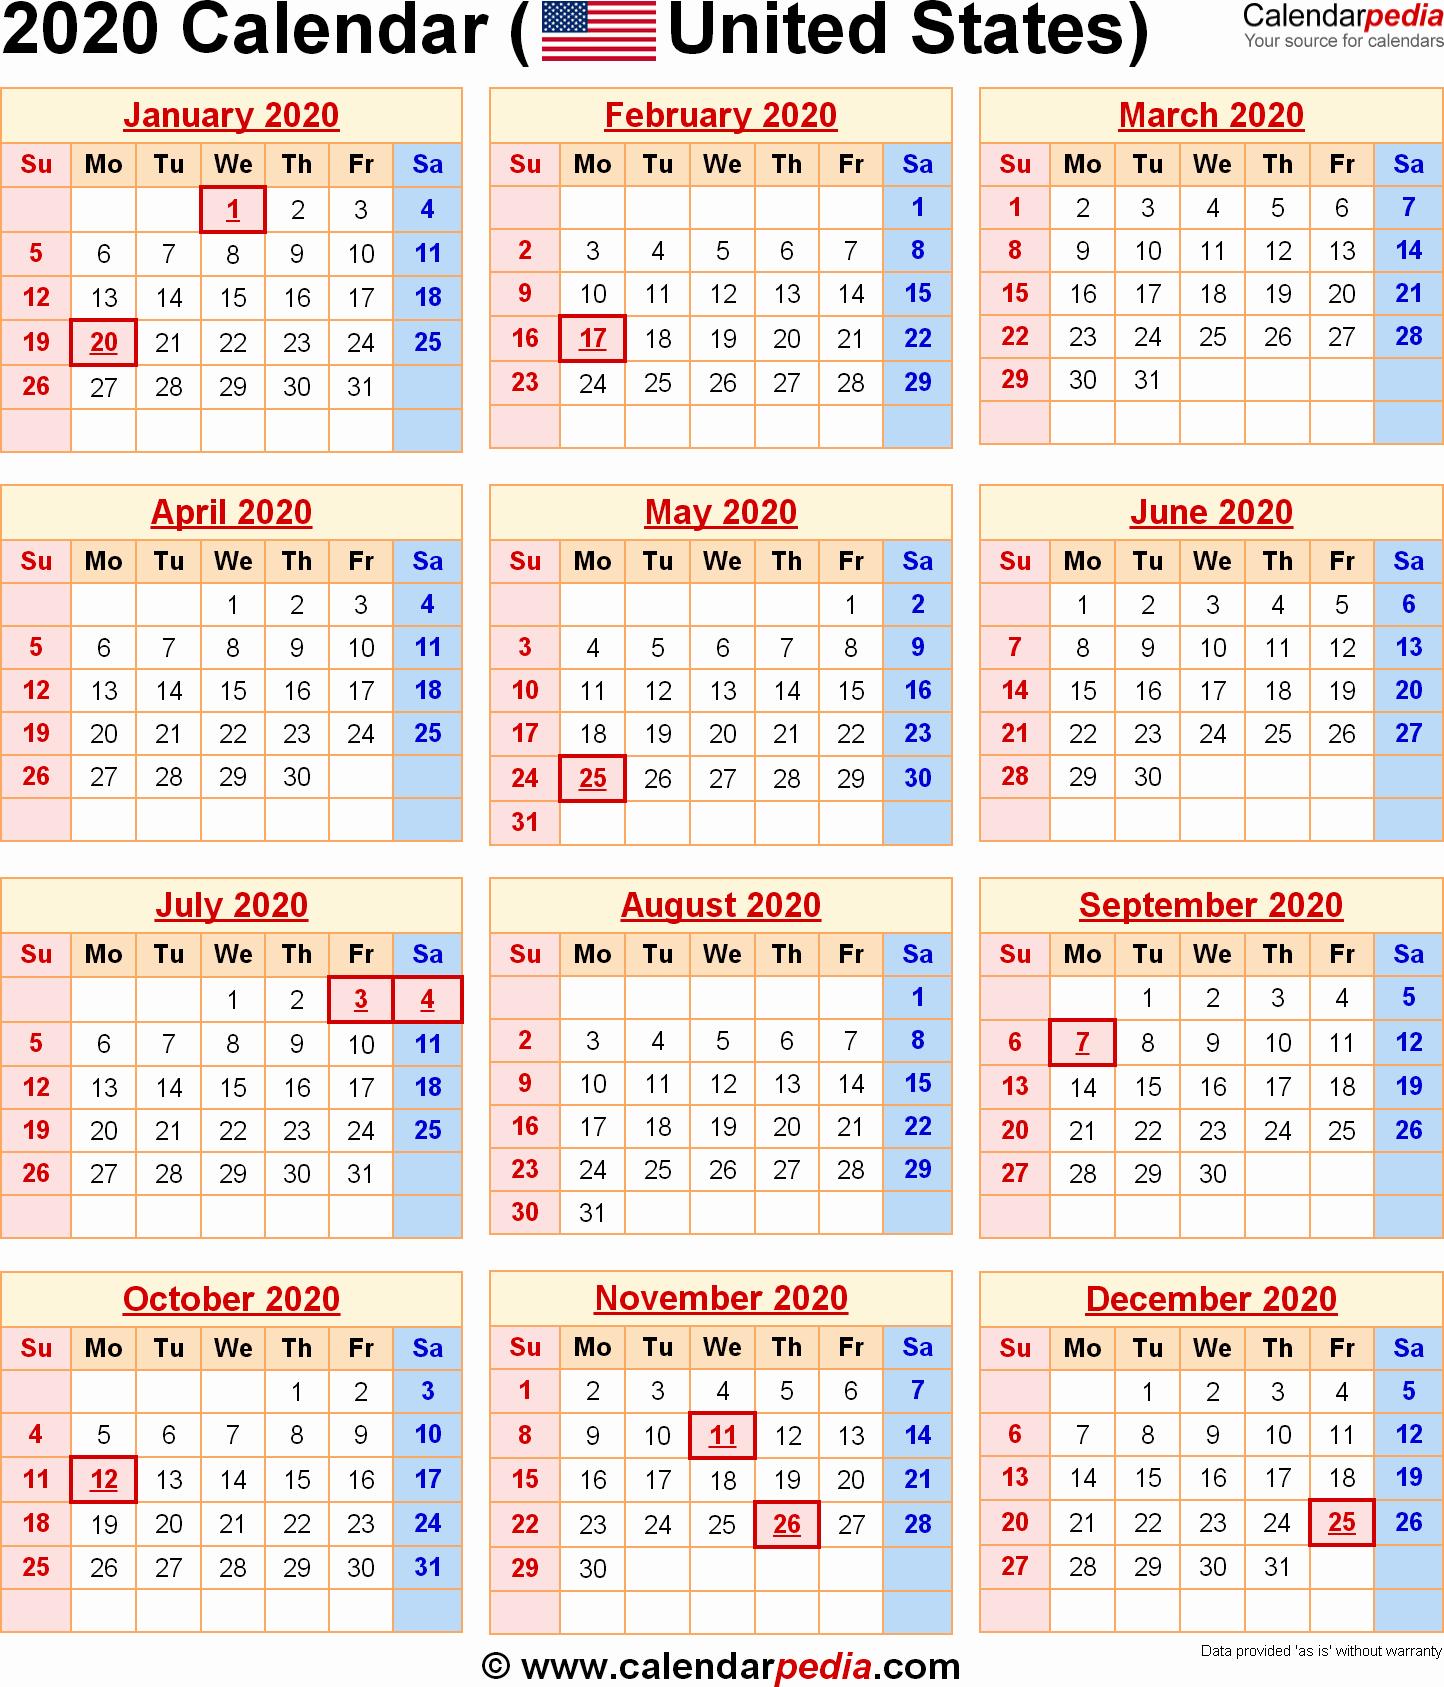 Free Printable Yearly Calendar 2019 2020 2020 Calendar with Federal